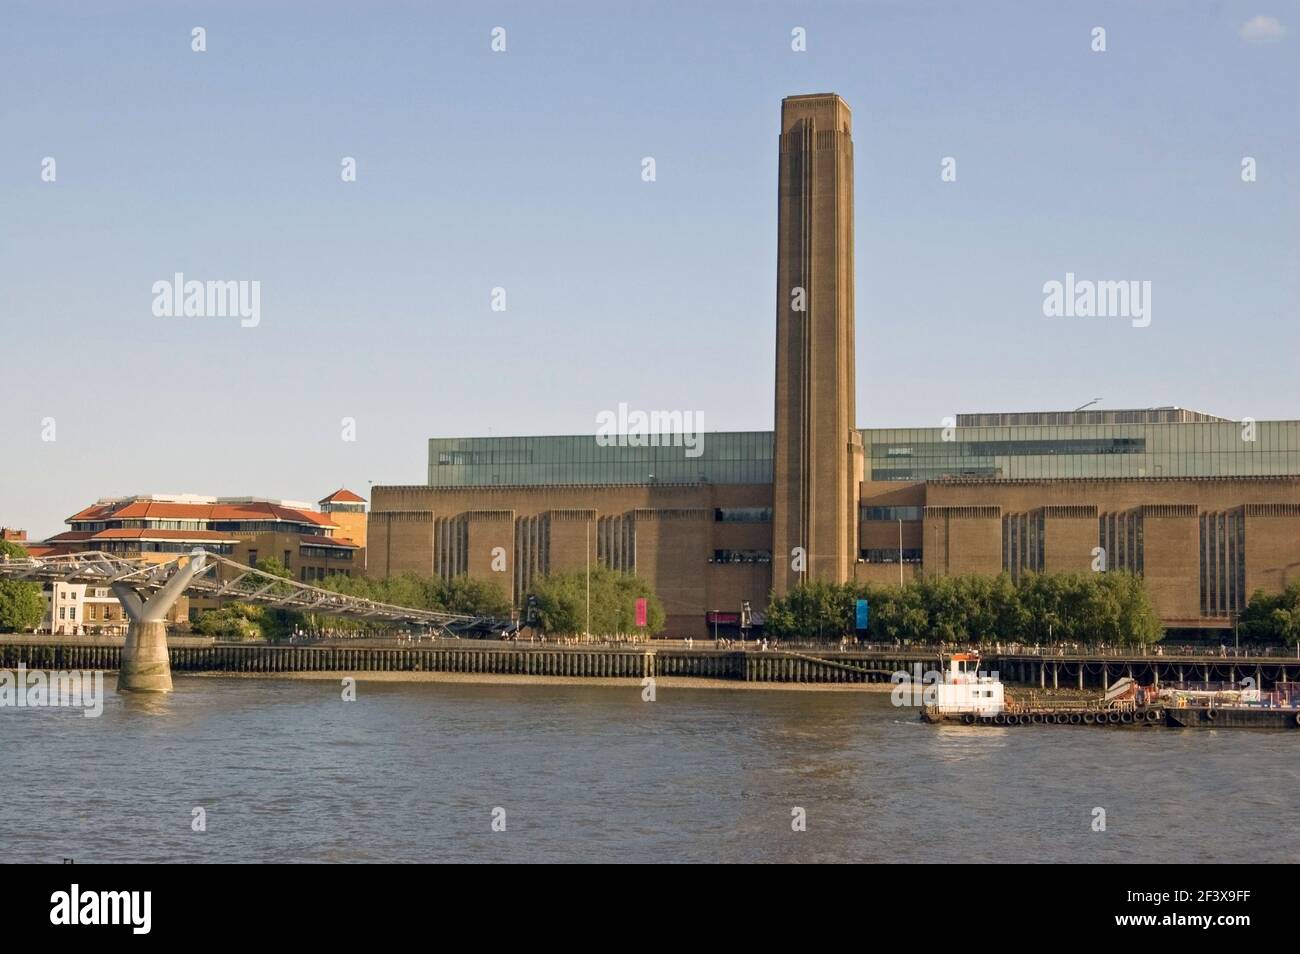 The former Bankside Power Station, now Tate Modern Gallery on the south bank of the River Thames in Southwark, London. Stock Photo